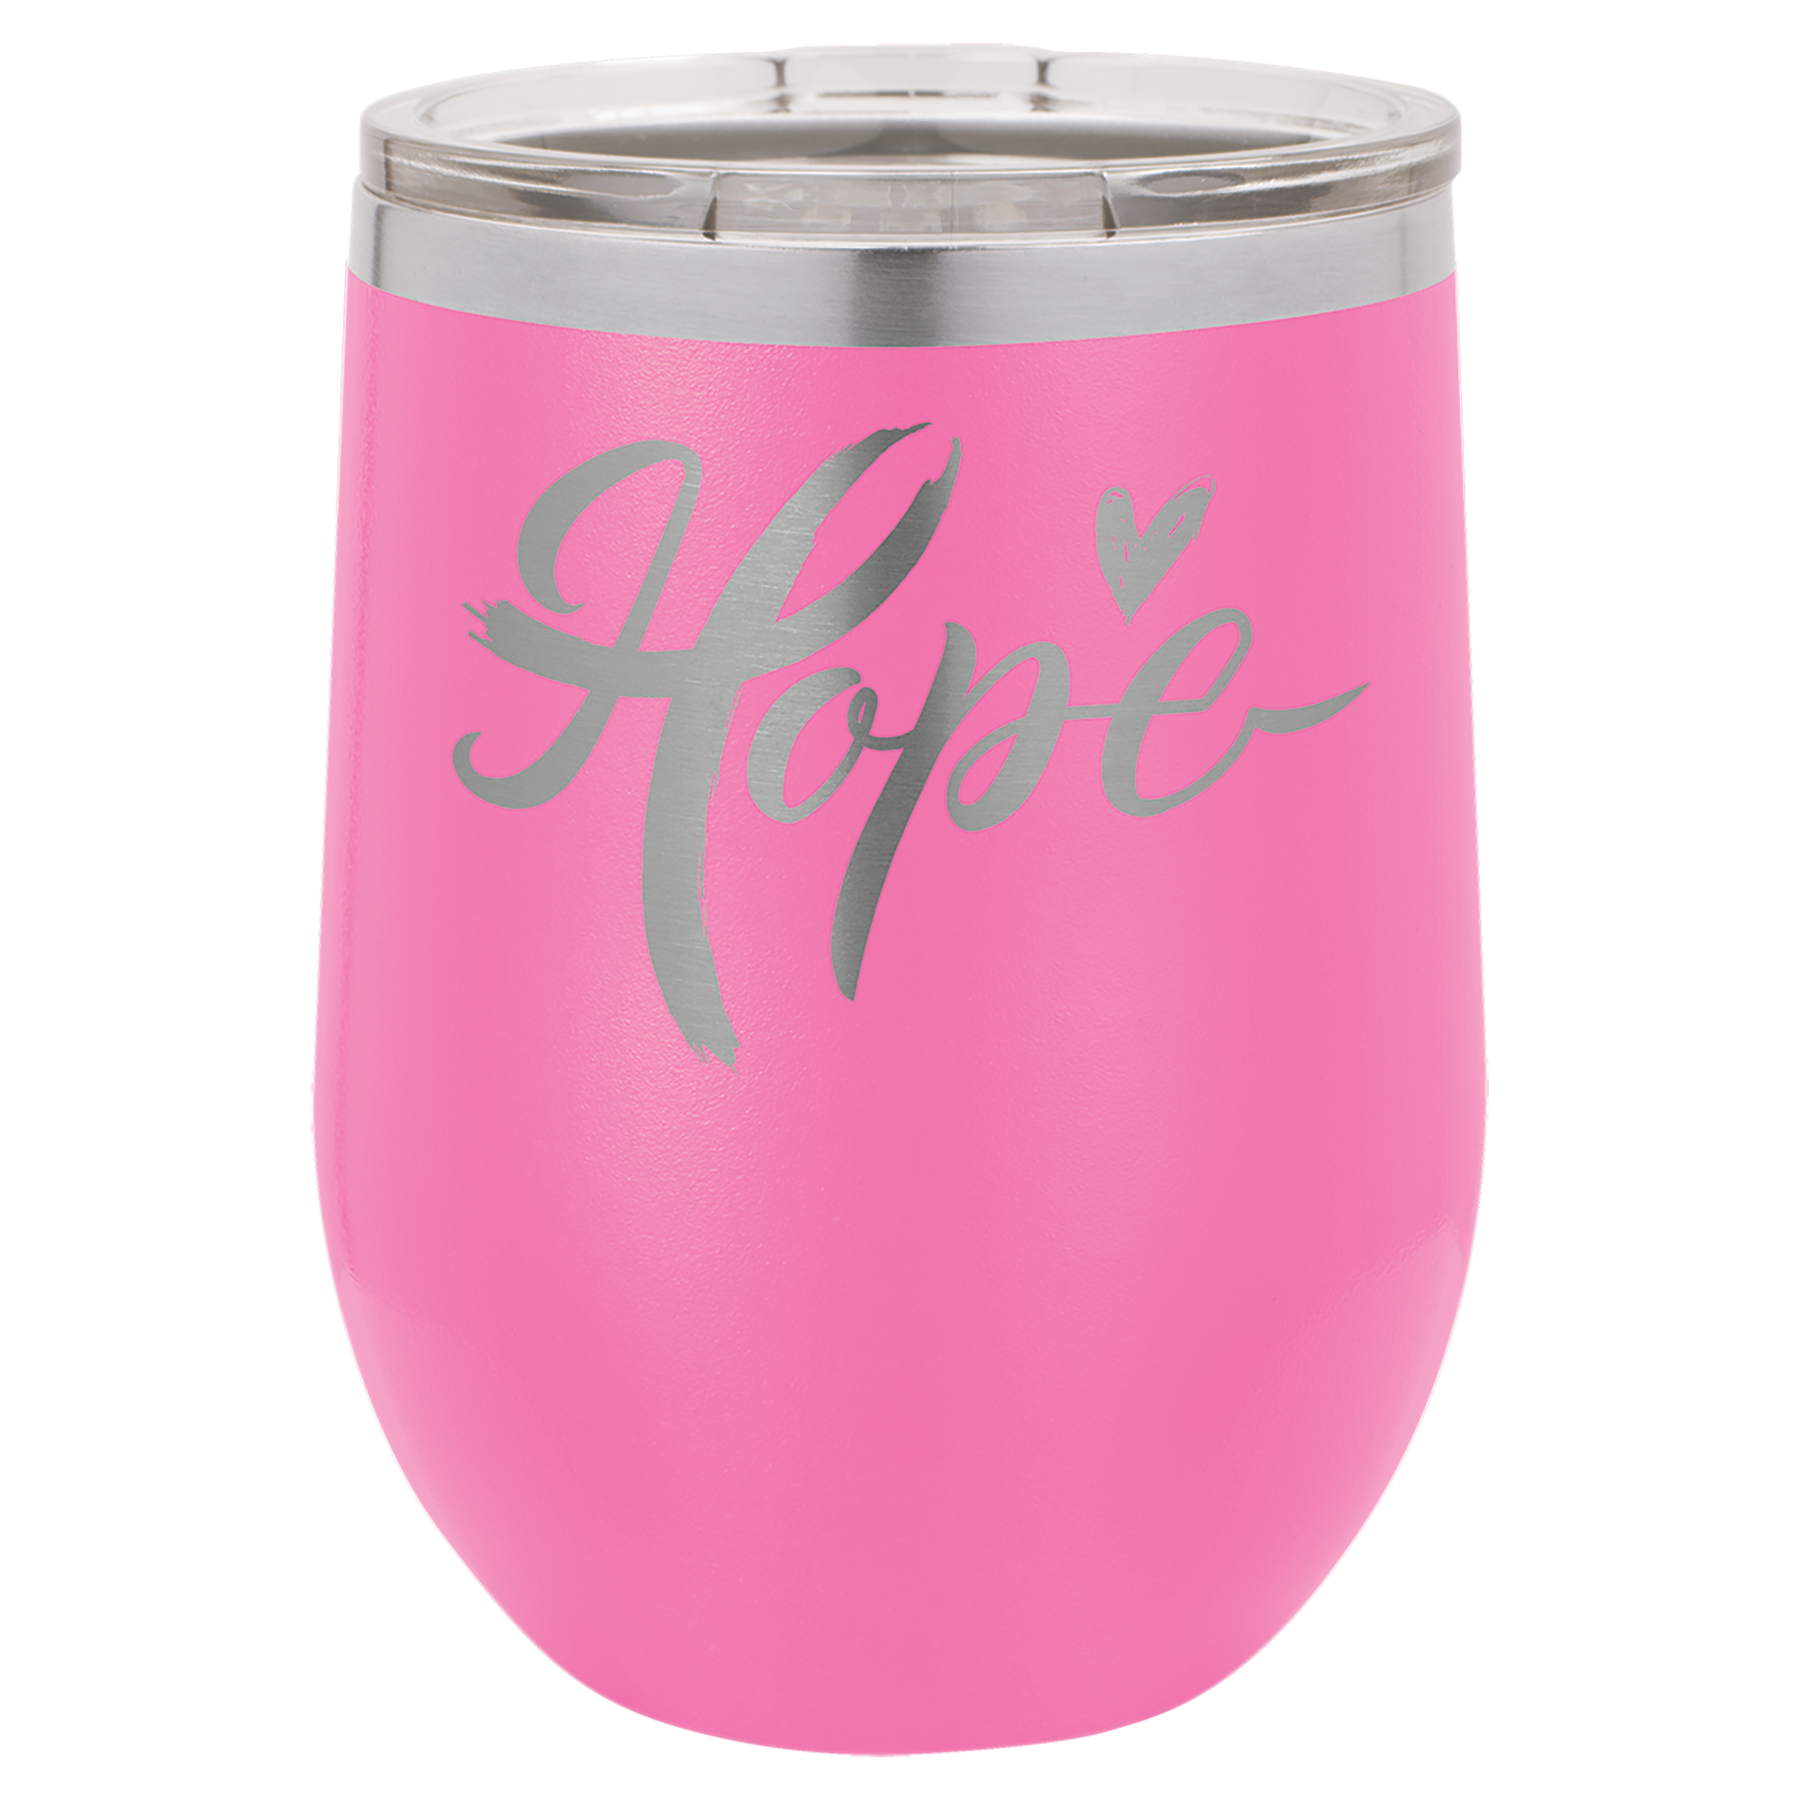 Any Stainless Steel Tumbler Engraved — Raleigh Laser Engraving, Gifts, YETI